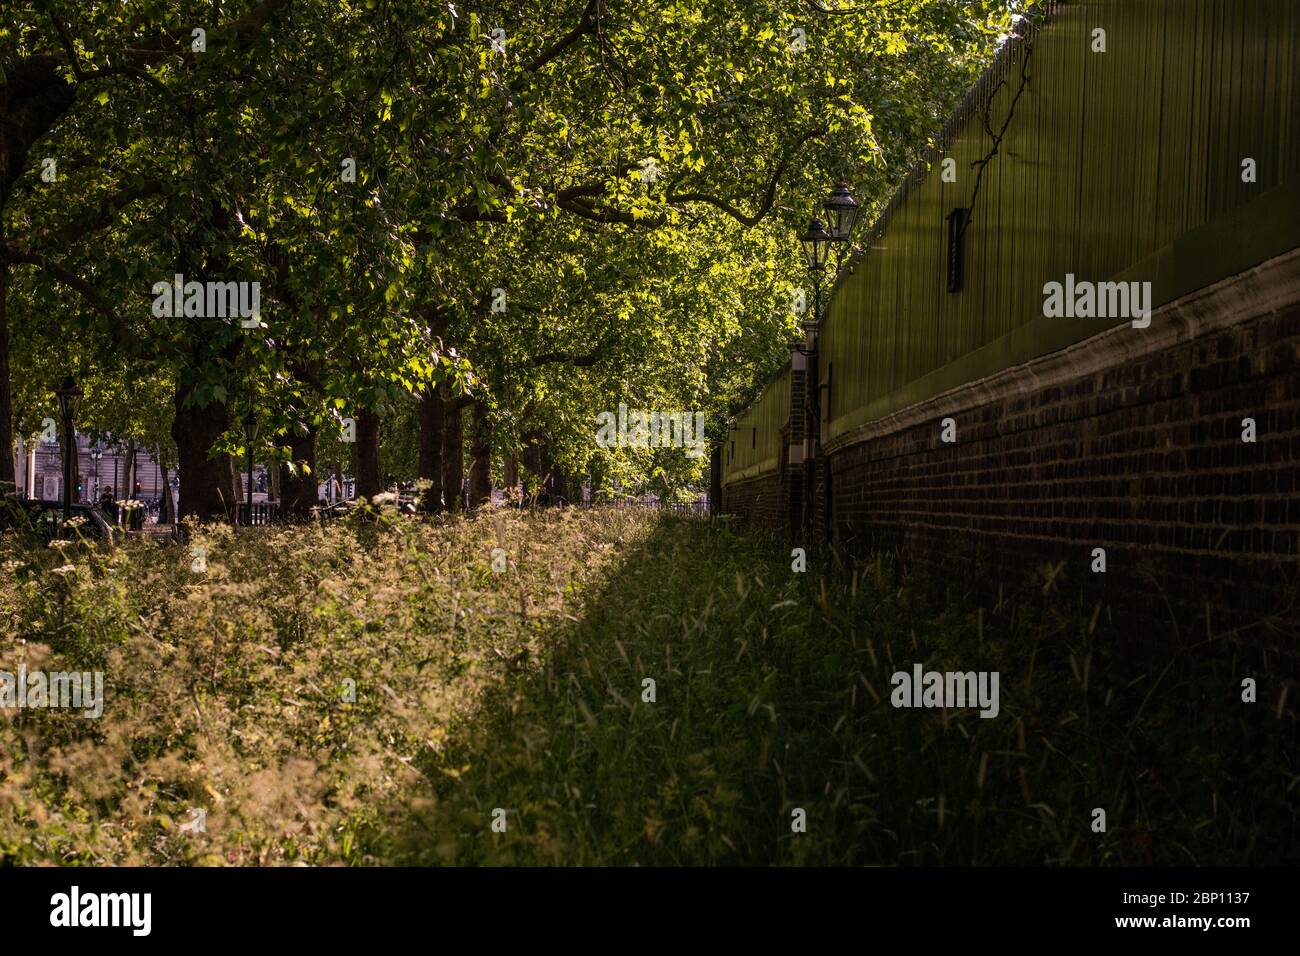 Perspective view of a wall and overgrown grass with overhanging trees in summer Stock Photo